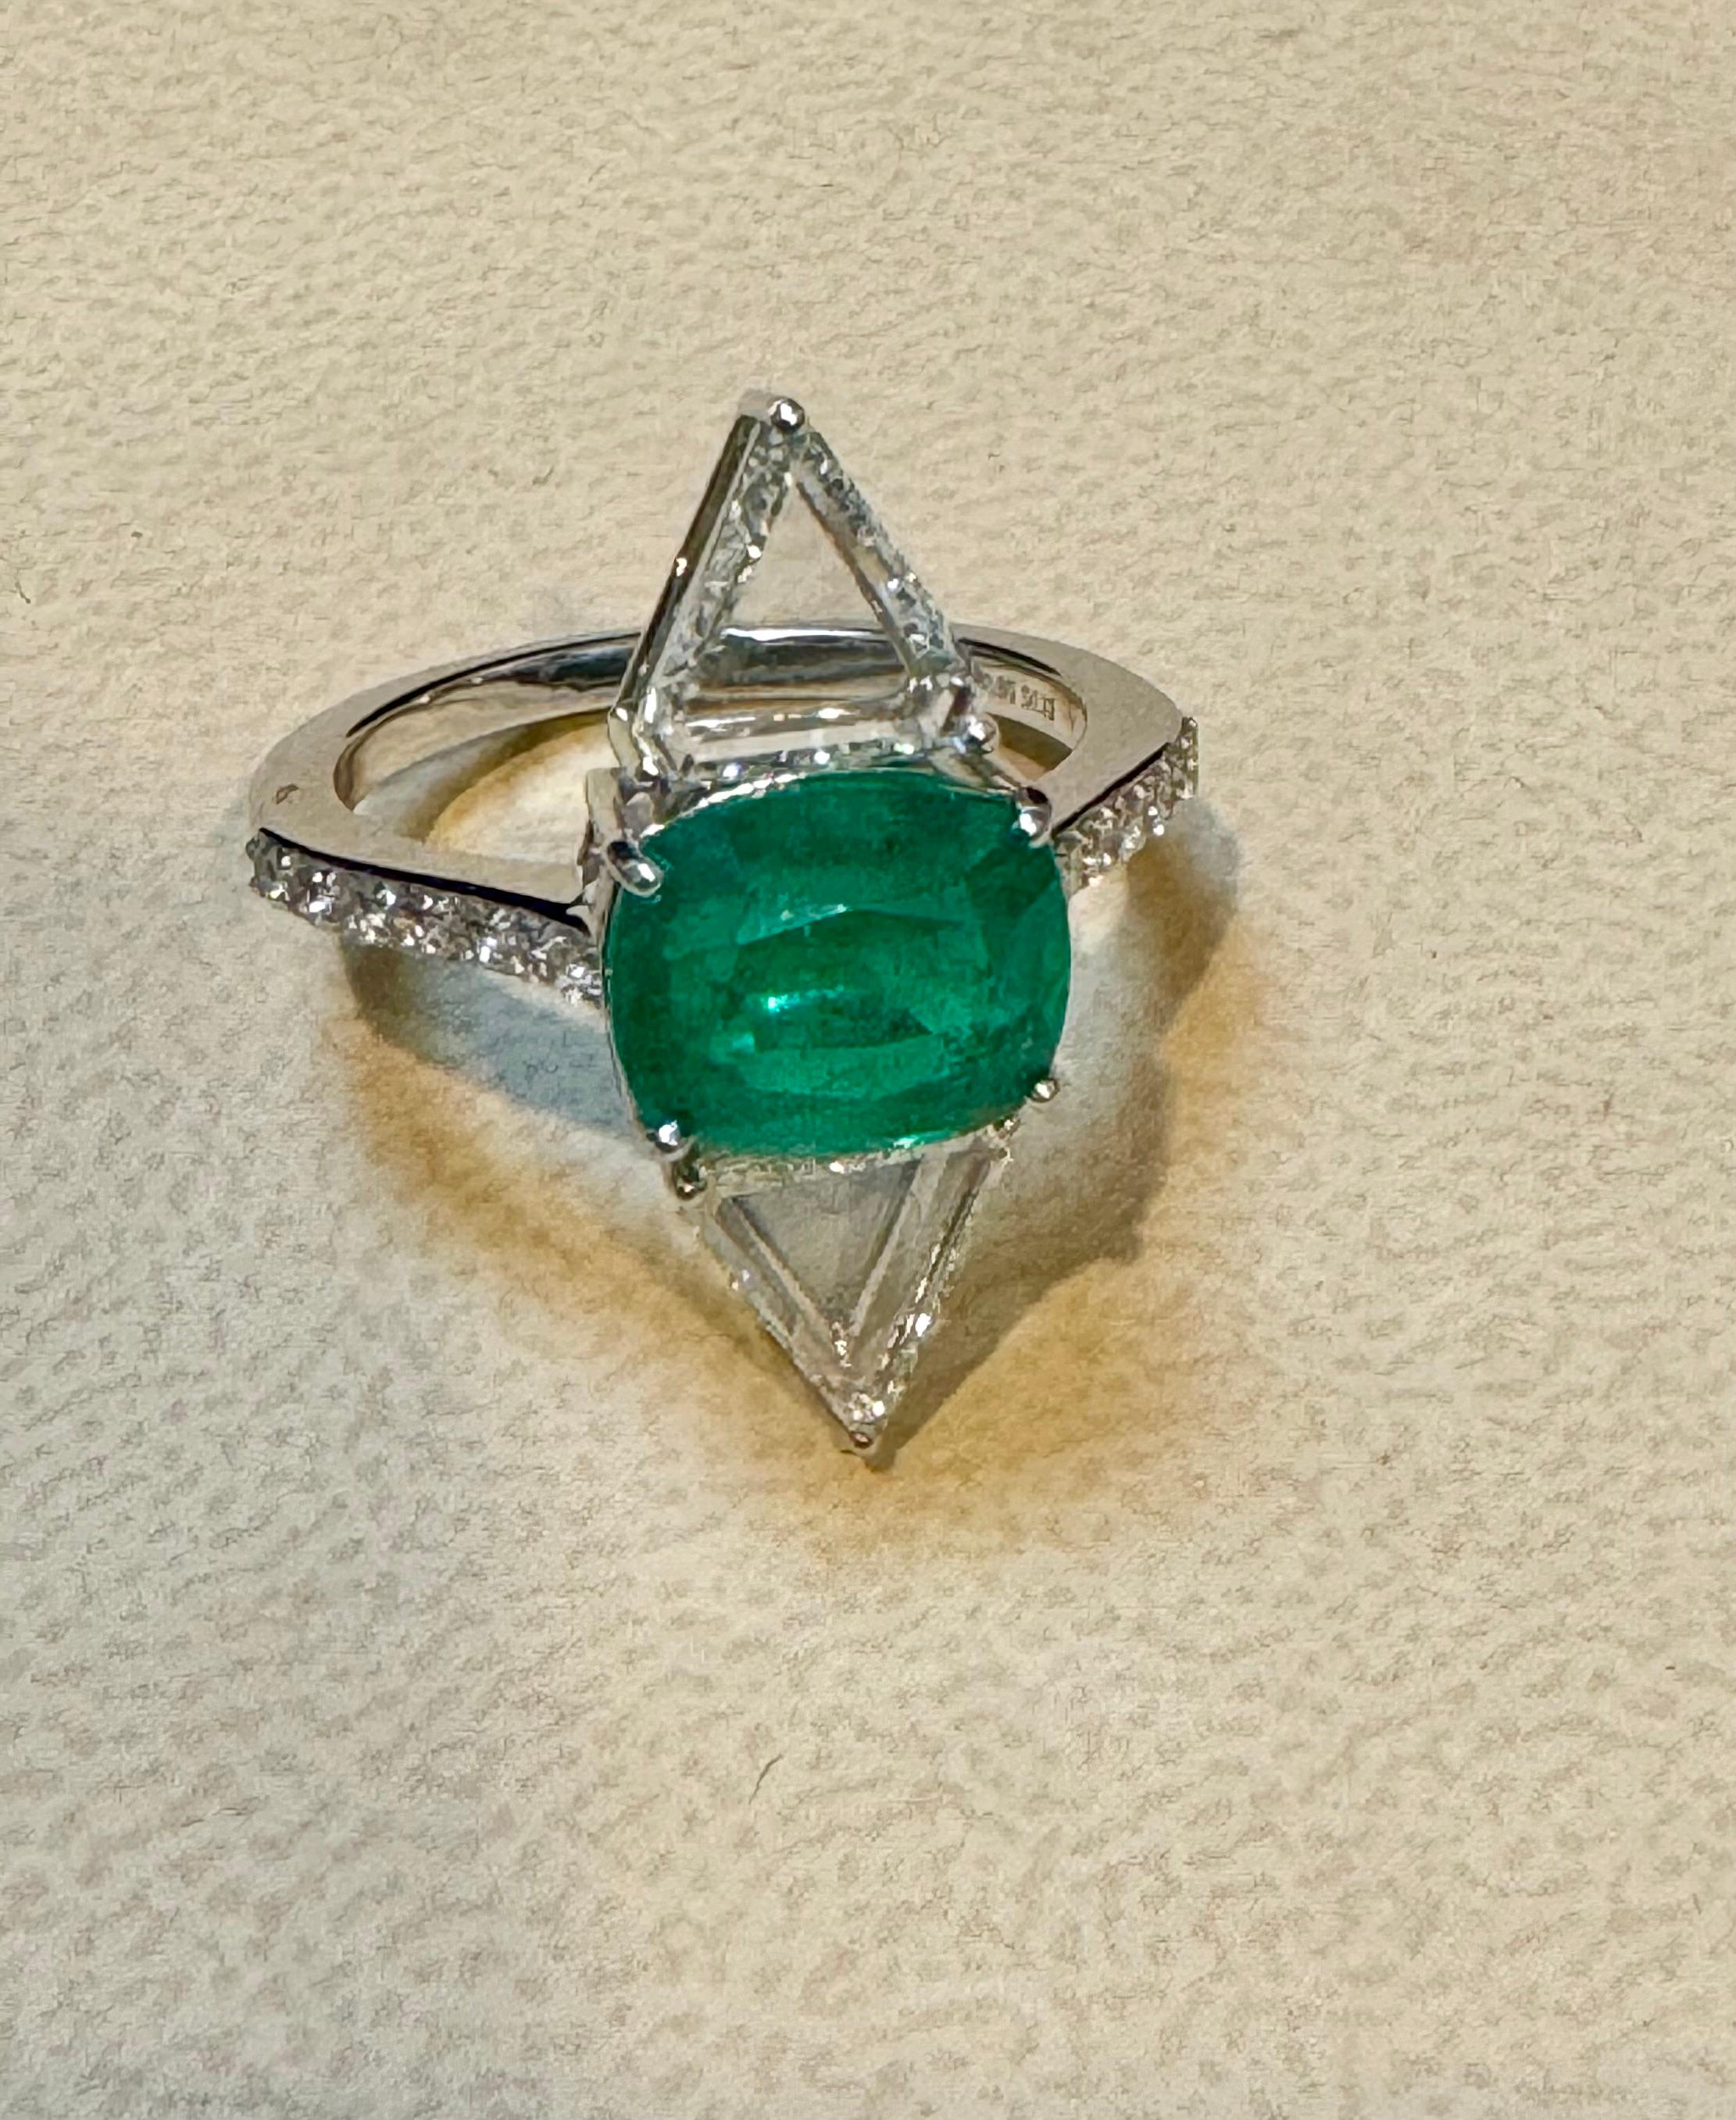 3.8 Ct Finest Zambian Cushion Cut Emerald & 1.5Ct Diamond Ring, 18 Kt Gold , 7.5 In Excellent Condition For Sale In New York, NY